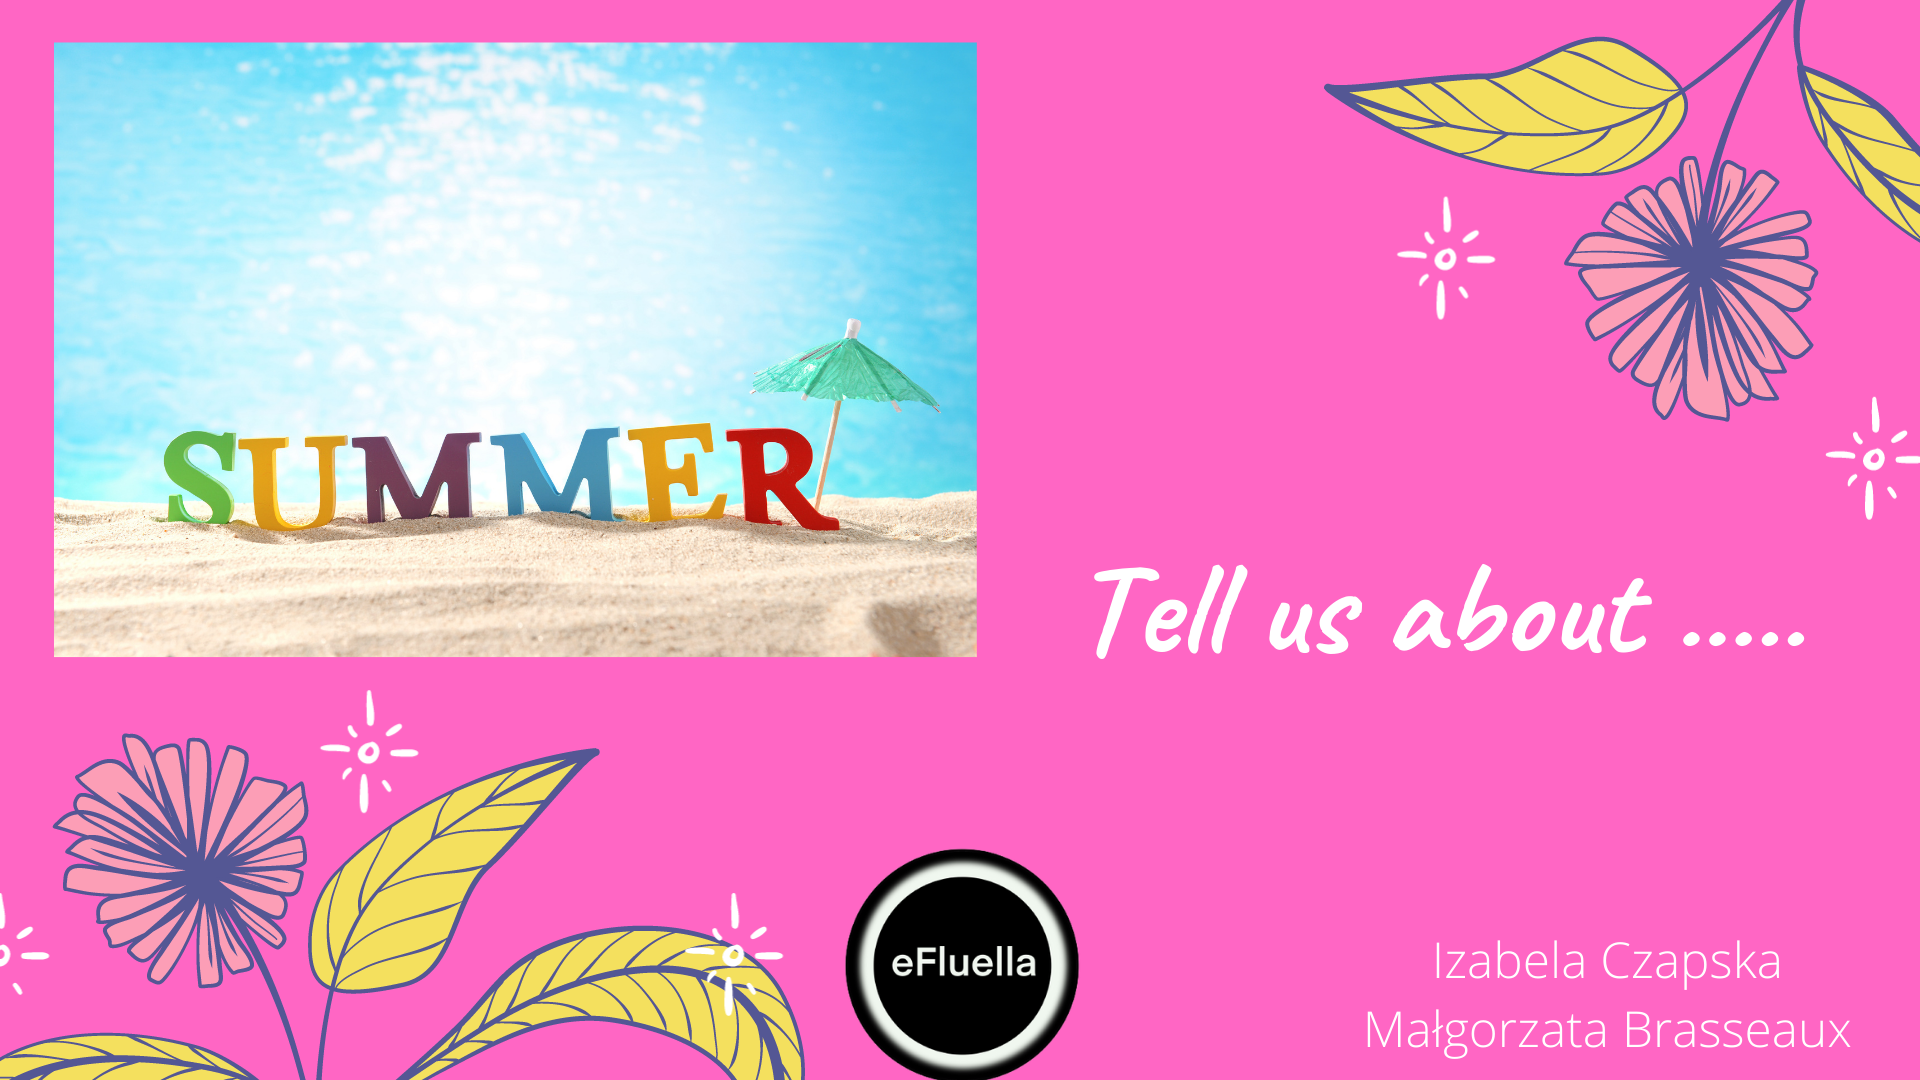 Tell us about …. (summer holidays)